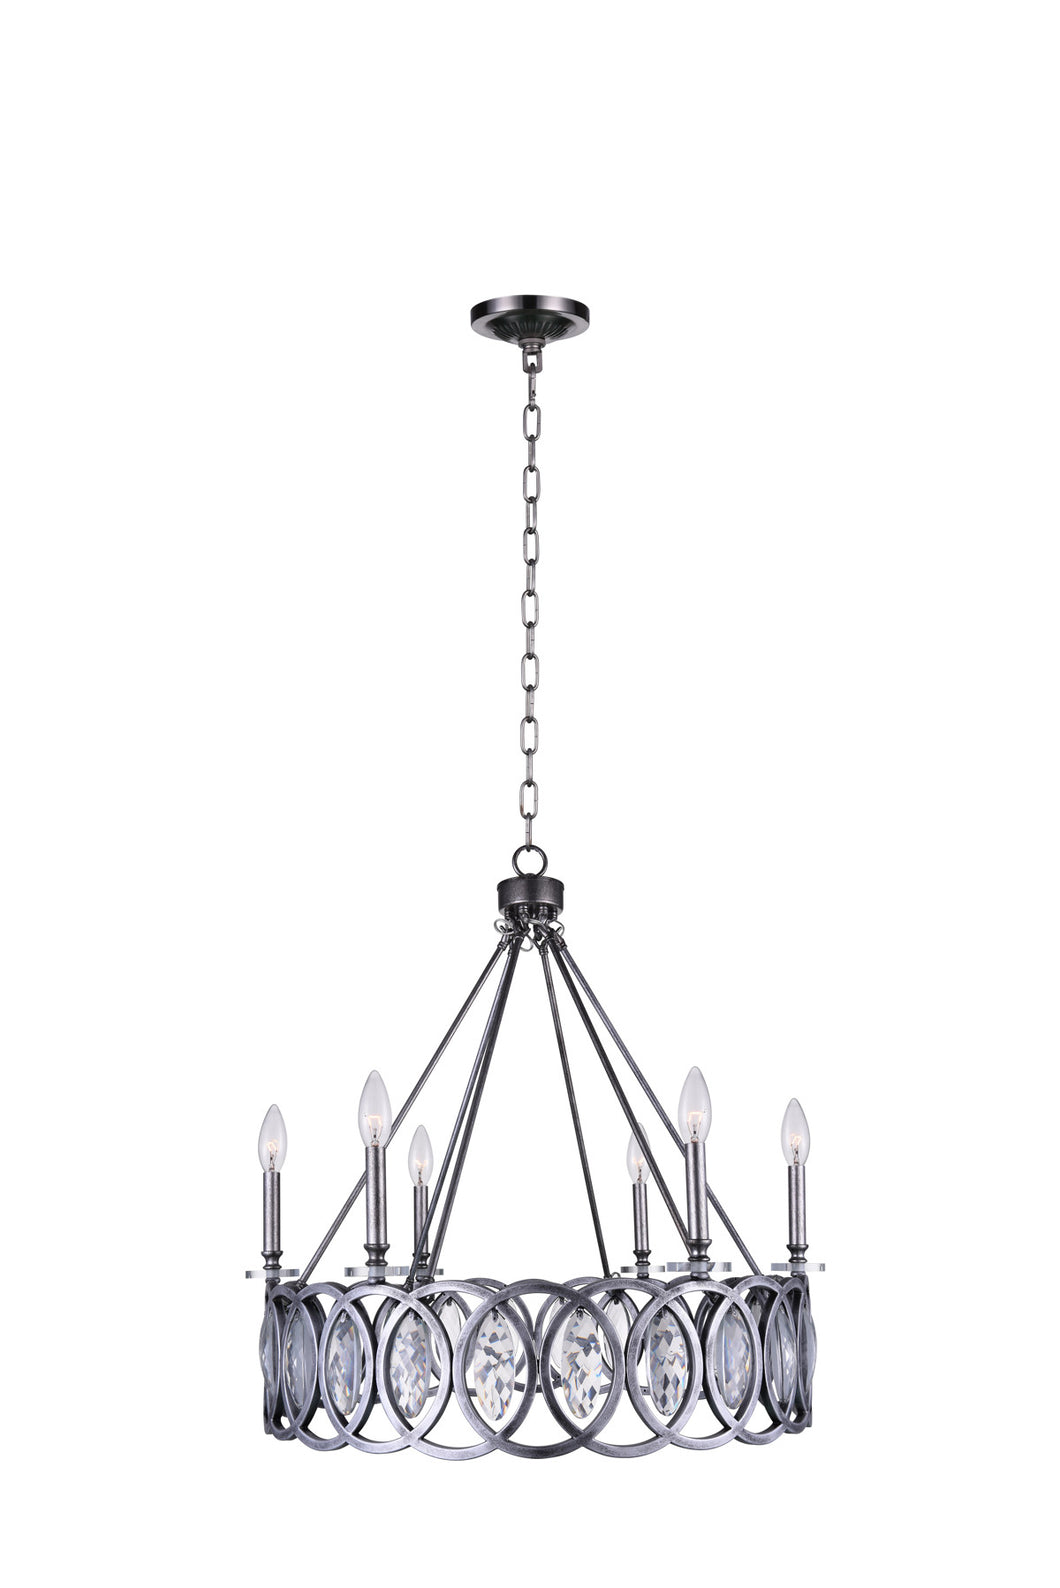 6 Light Candle Chandelier with Gun Metal finish